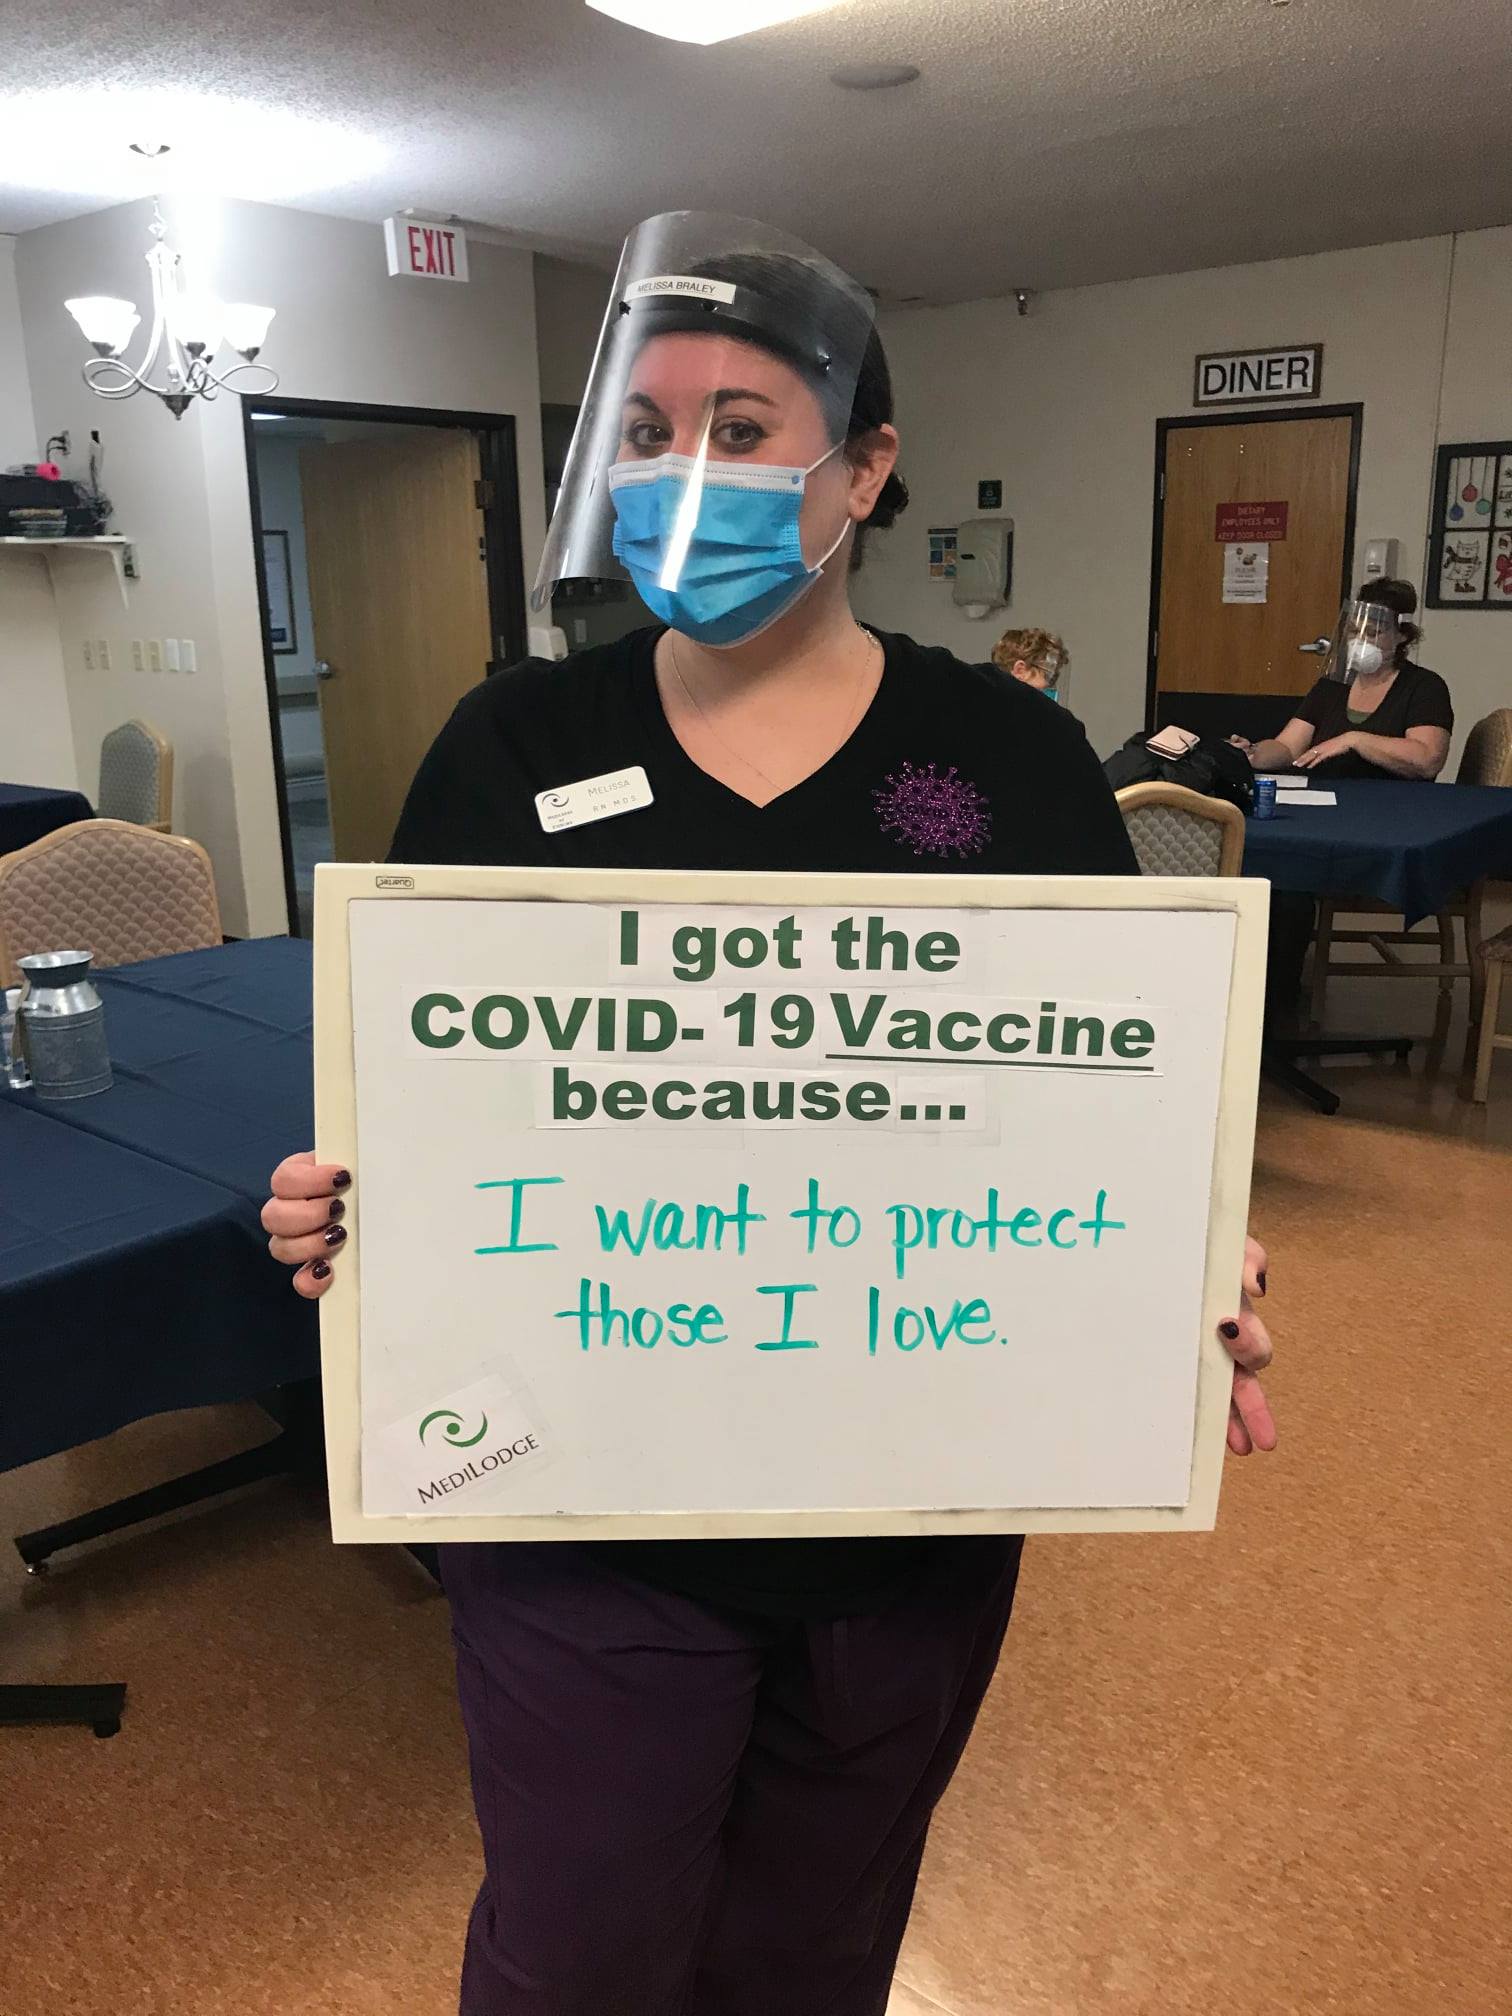 I got the COVID-19 vaccine because i want to protect those i love